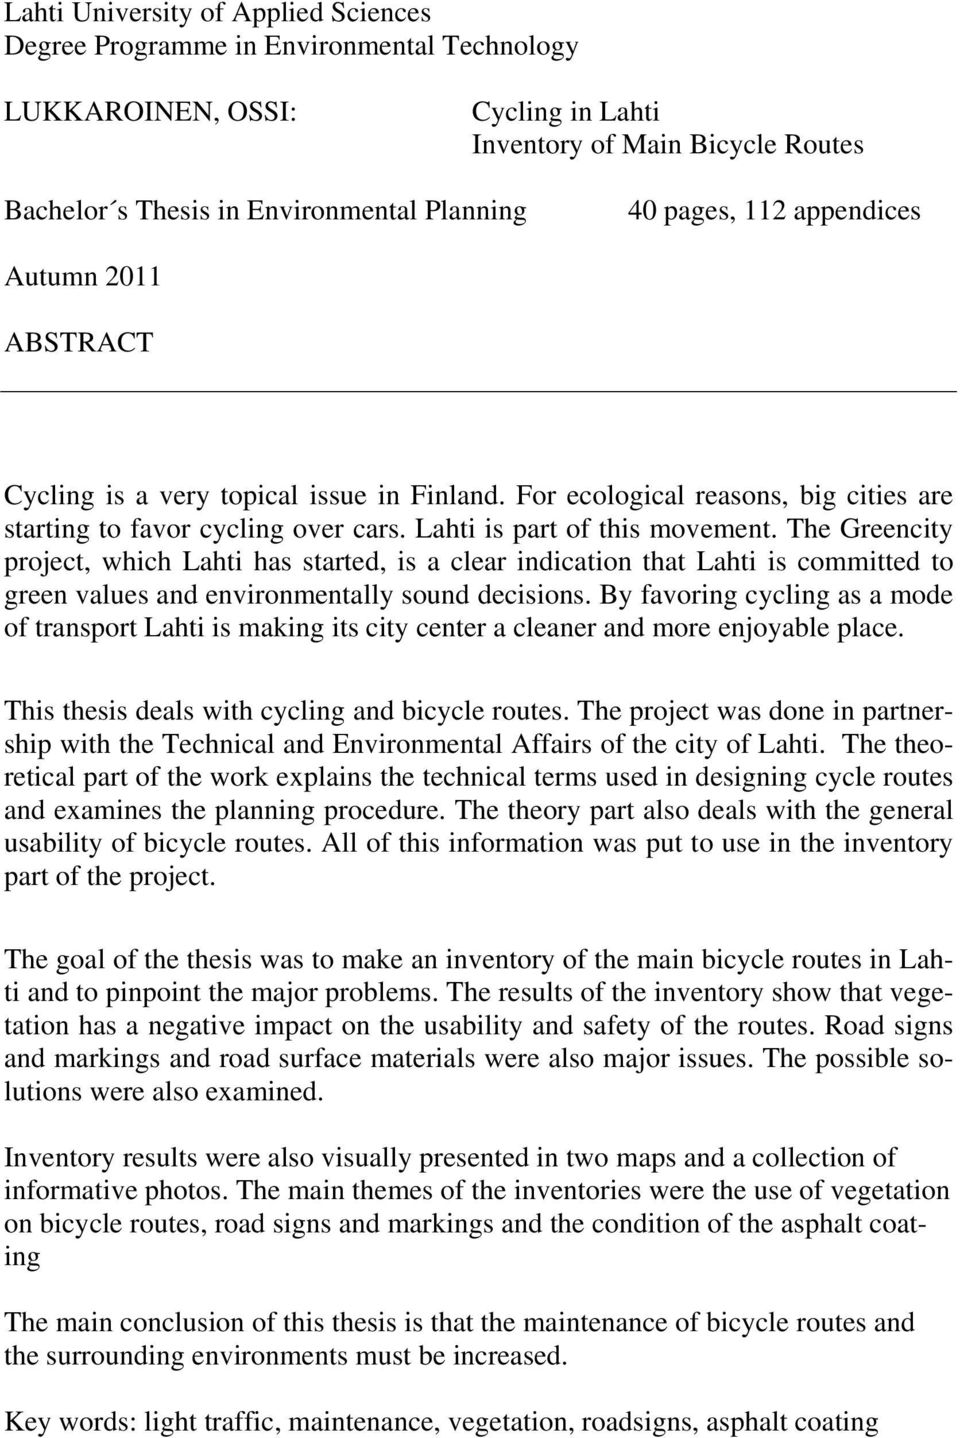 The Greencity project, which Lahti has started, is a clear indication that Lahti is committed to green values and environmentally sound decisions.